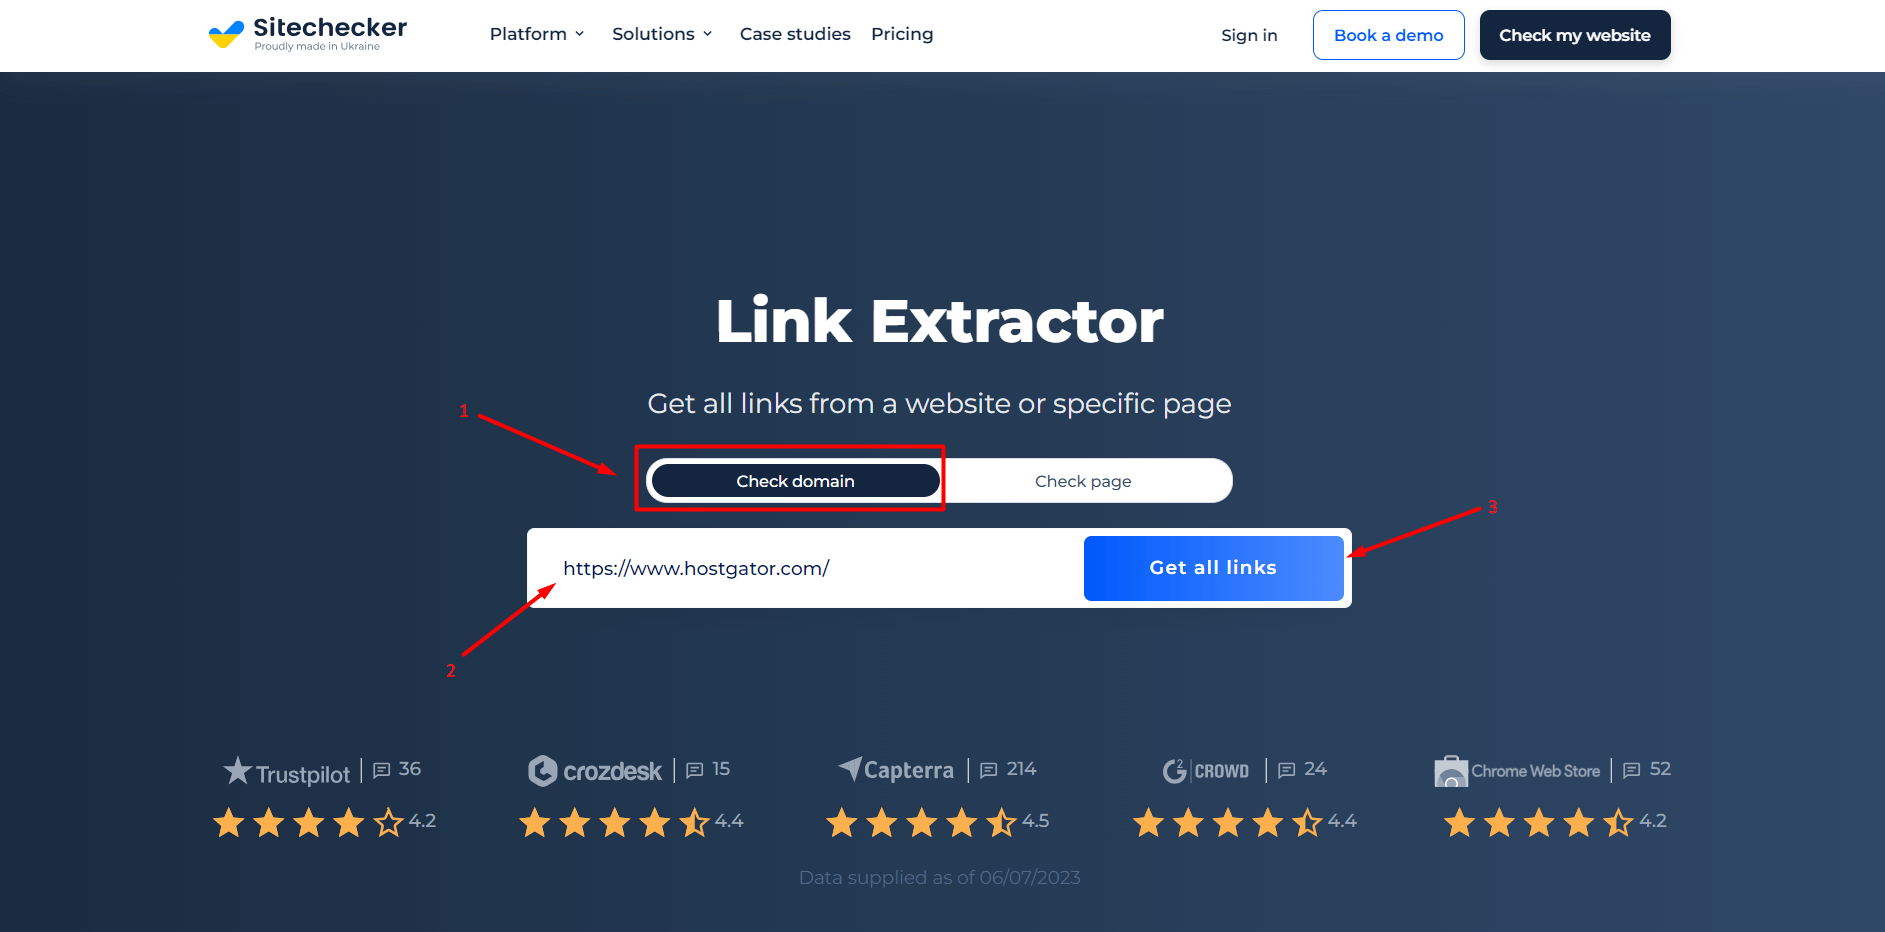 Link Extractor Domain Check